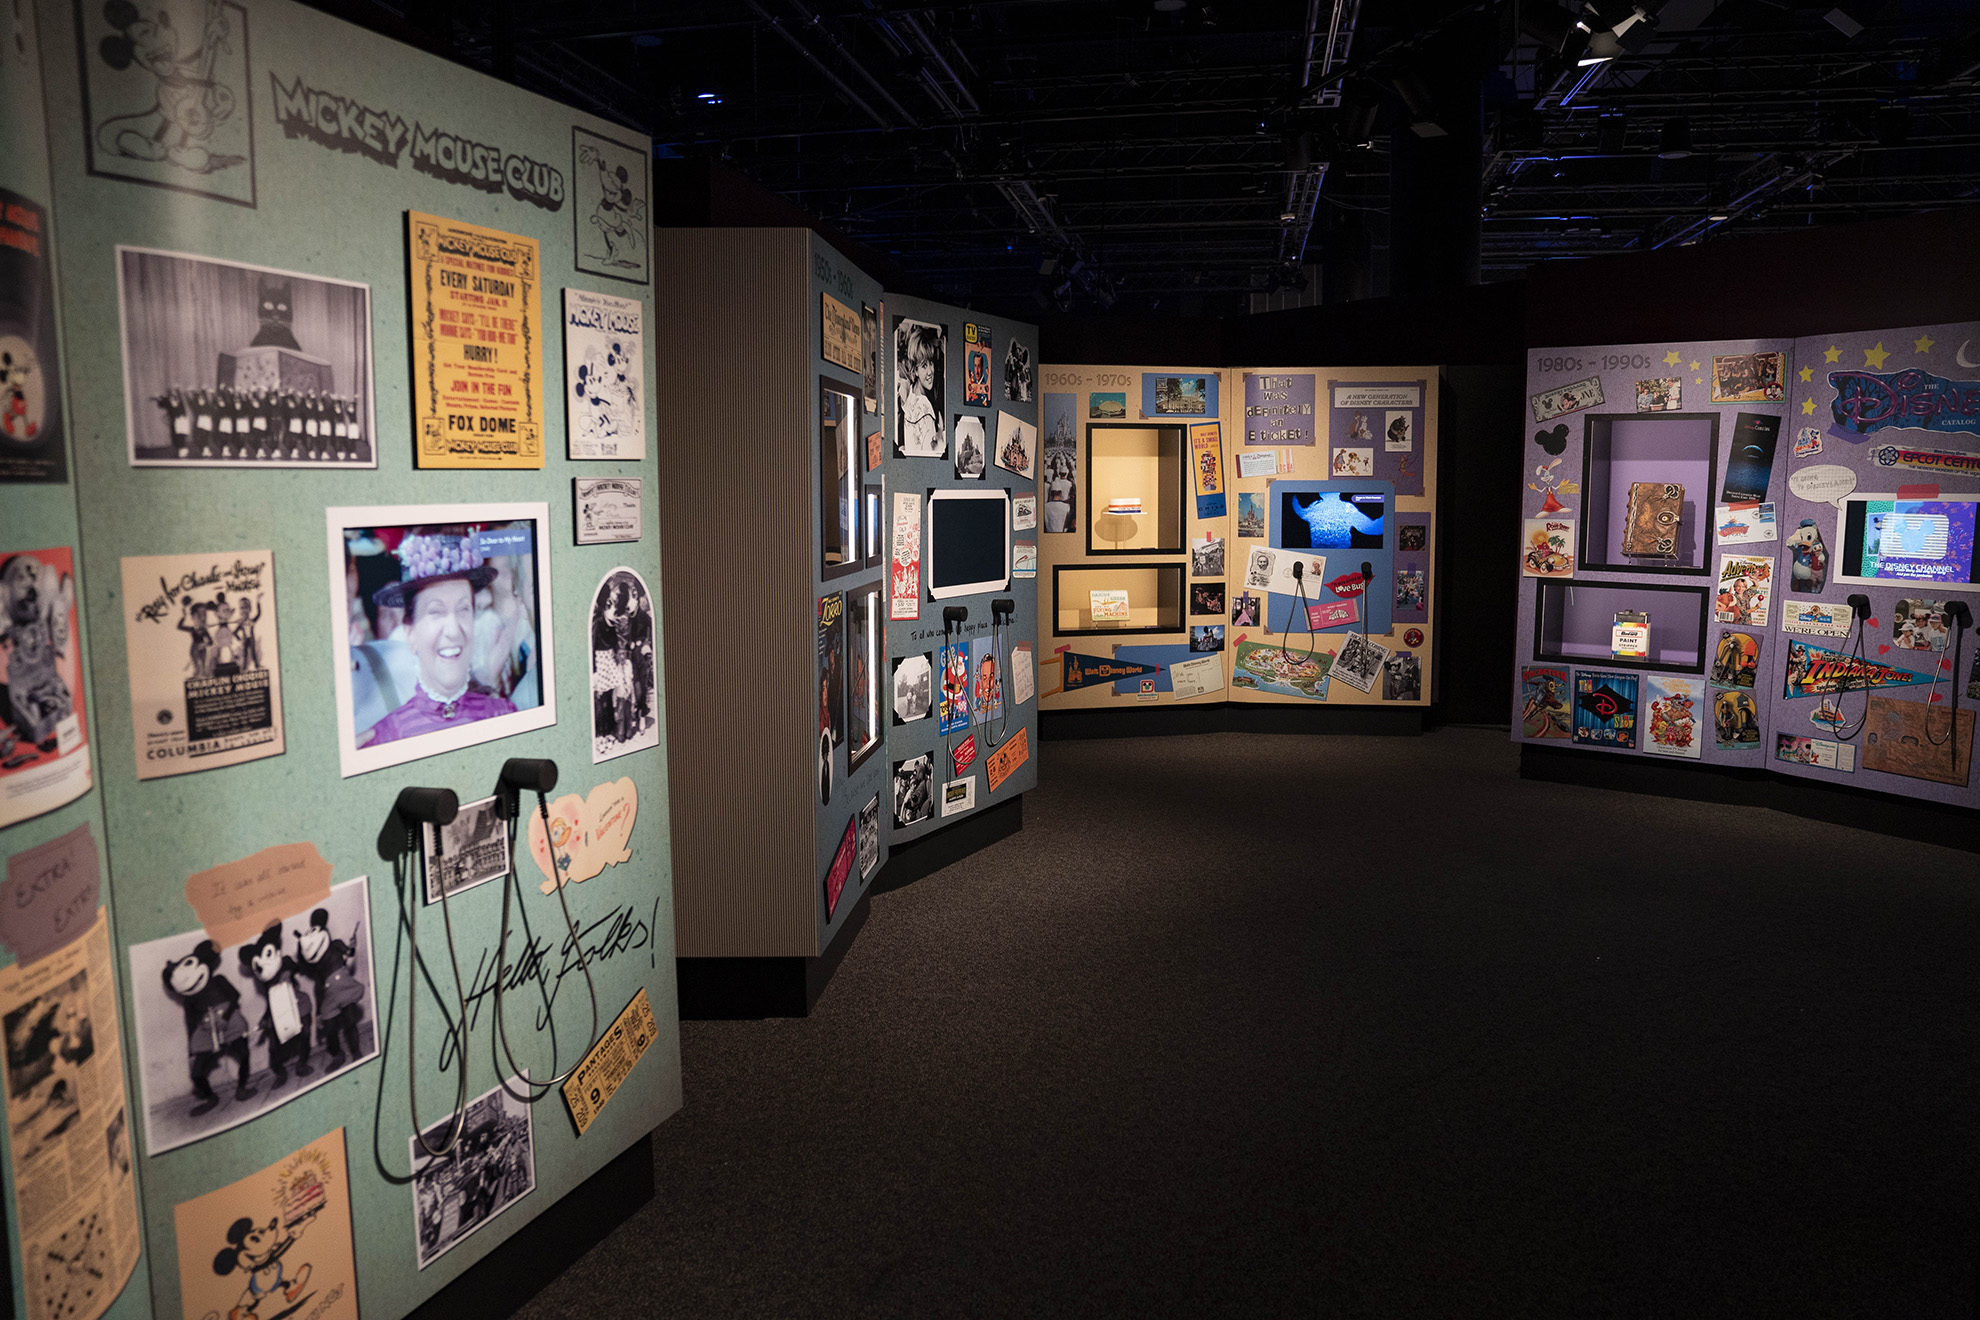 The Wonder of Disney gallery at Disney100: The Exhibition, now open at The Franklin Institute in Philadelphia. 